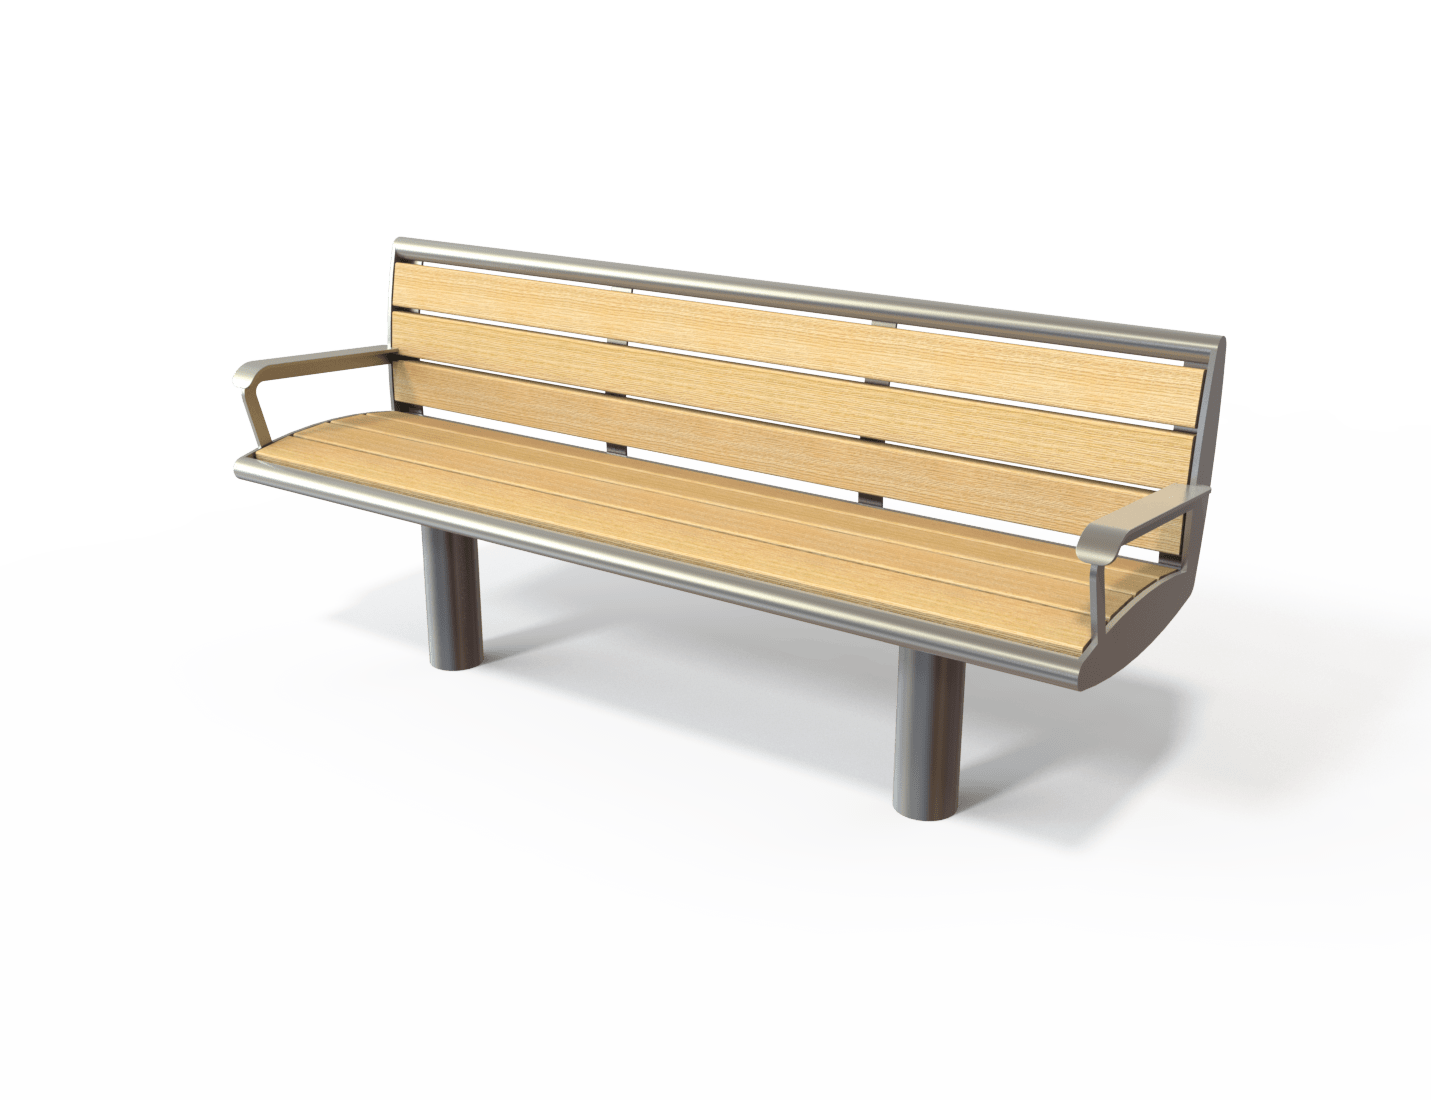 Dublin steel and timber seat